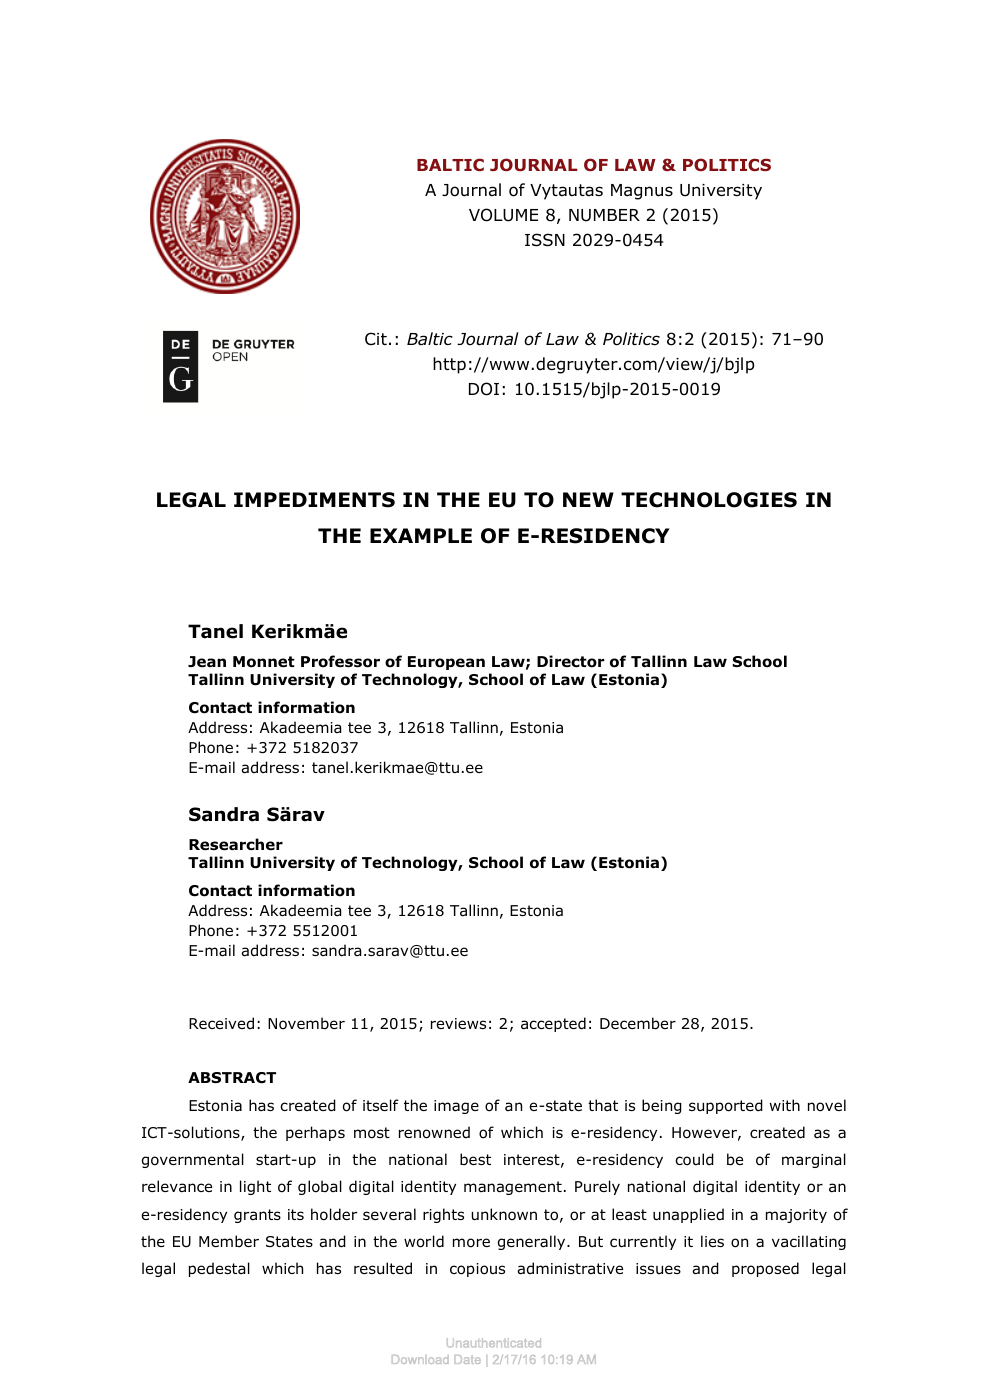 Legal Impediments In The Eu To New Technologies In The Example Of E Residency Topic Of Research Paper In Law Download Scholarly Article Pdf And Read For Free On Cyberleninka Open Science